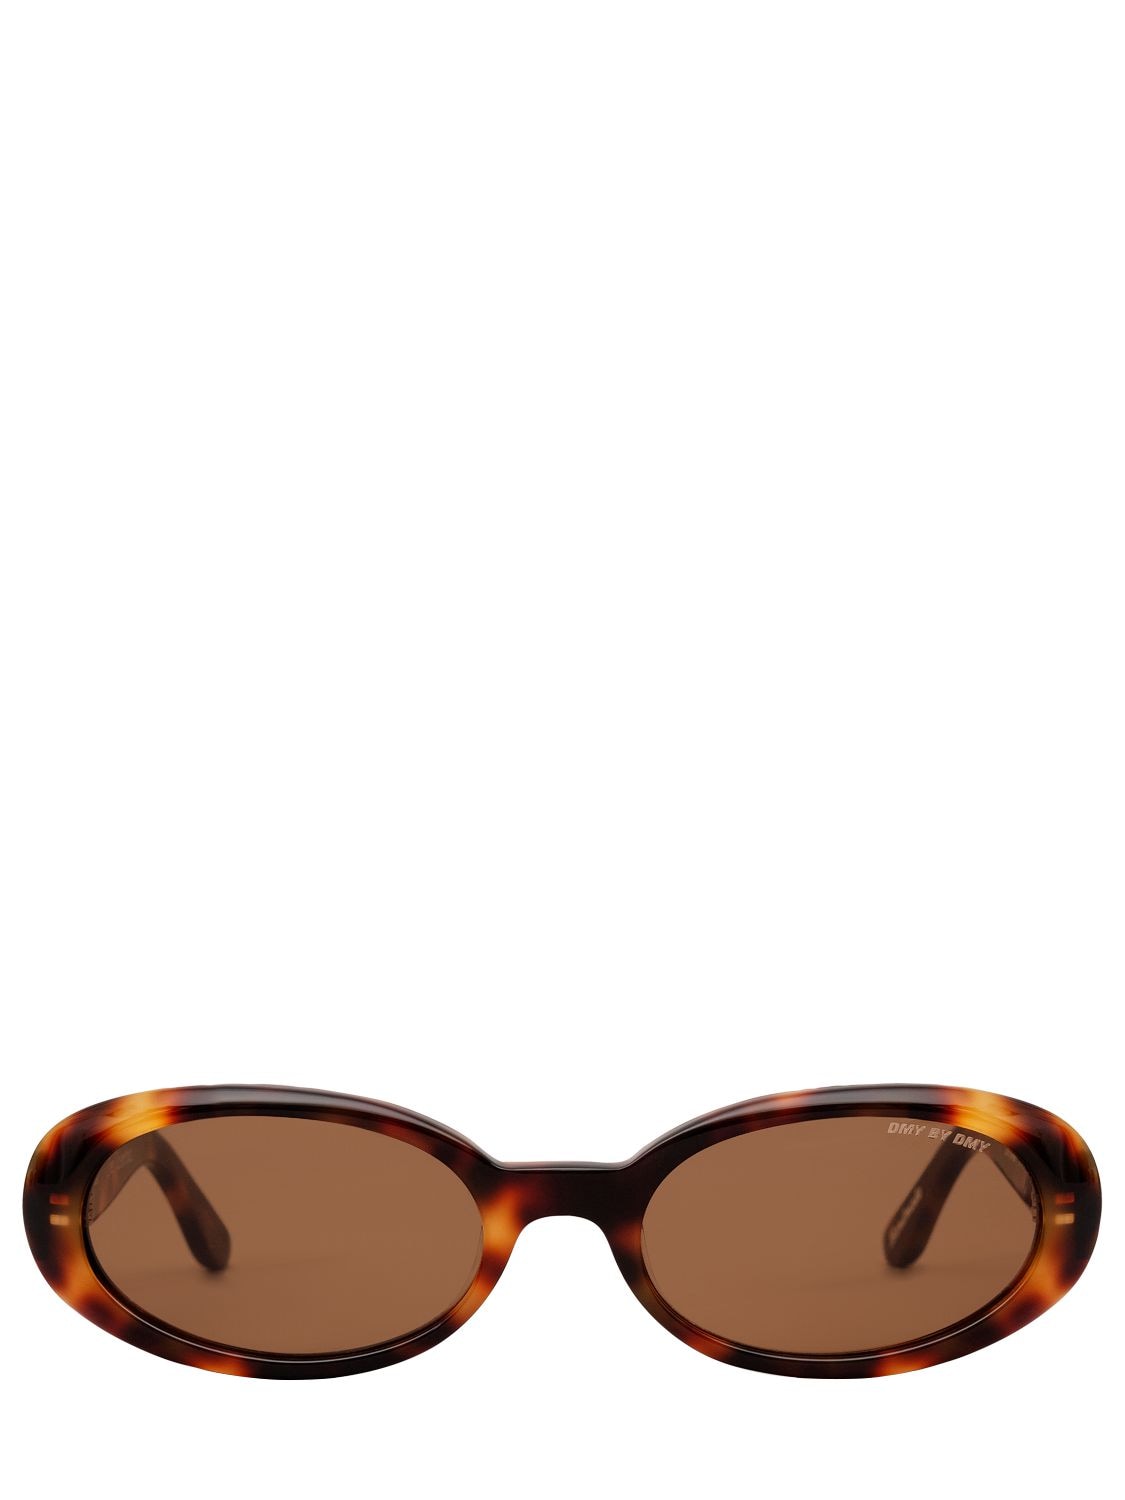 DMY BY DMY Valentina Oval Acetate Sunglasses